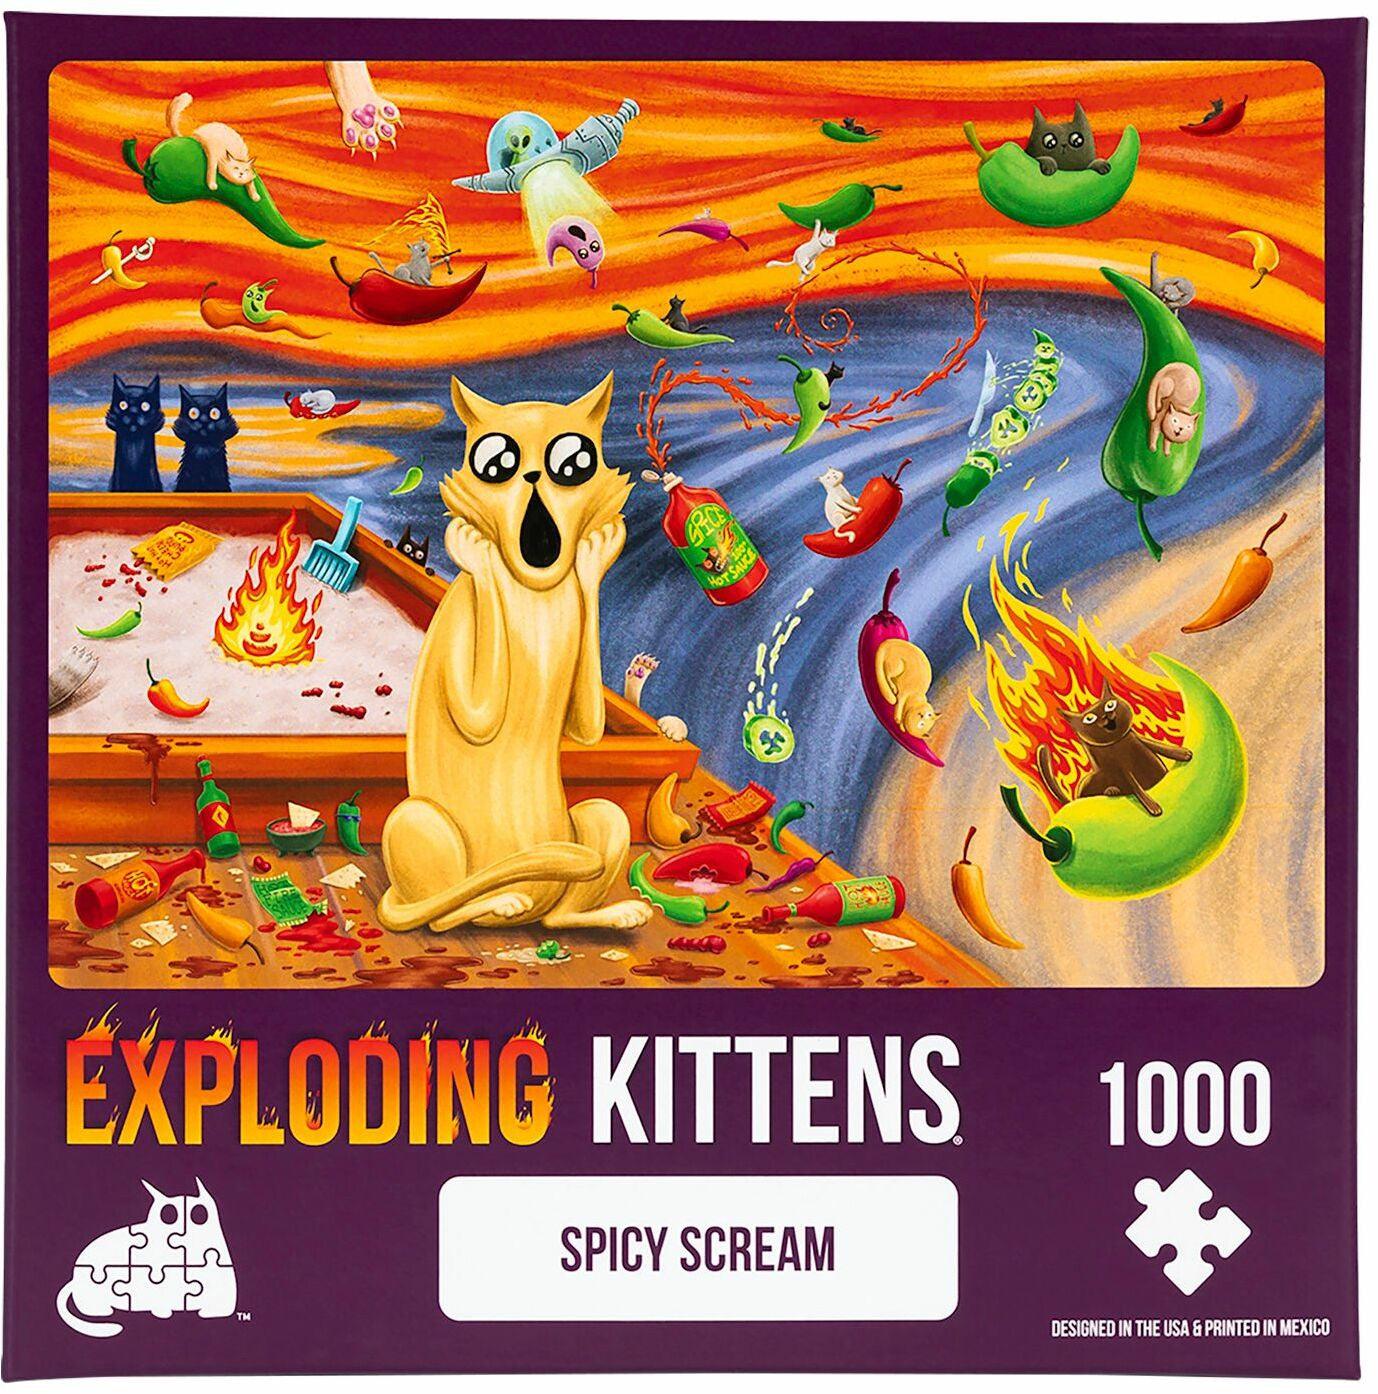 VR-101454 Exploding Kittens Puzzle Spicy Scream 1,000 pieces - Exploding Kittens - Titan Pop Culture